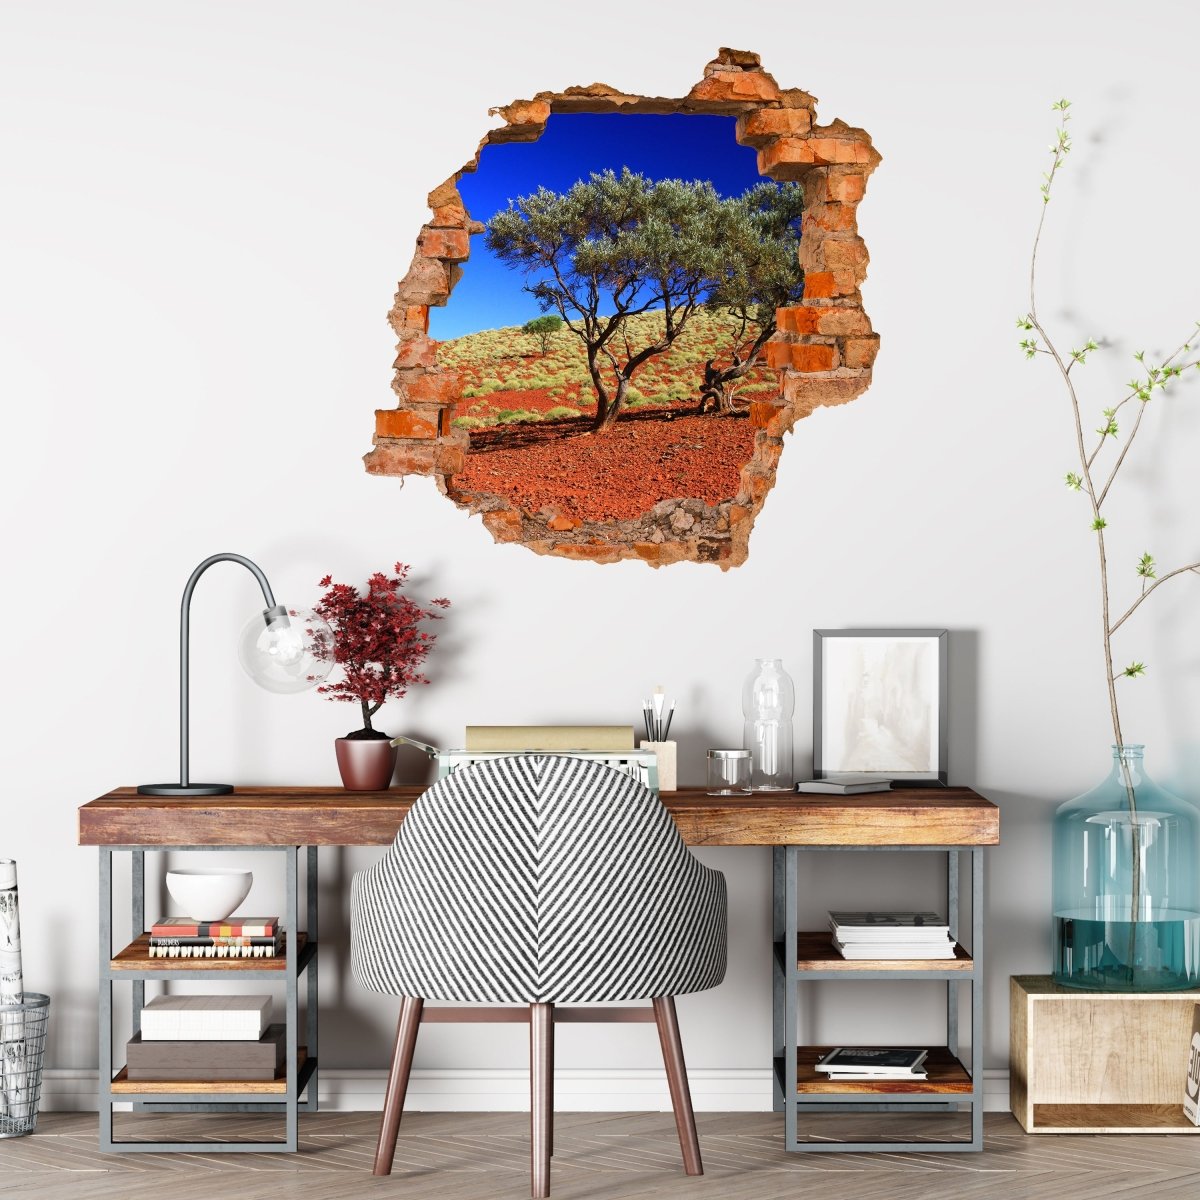 Discover Outback Australia 3D wall sticker - wall sticker M0217